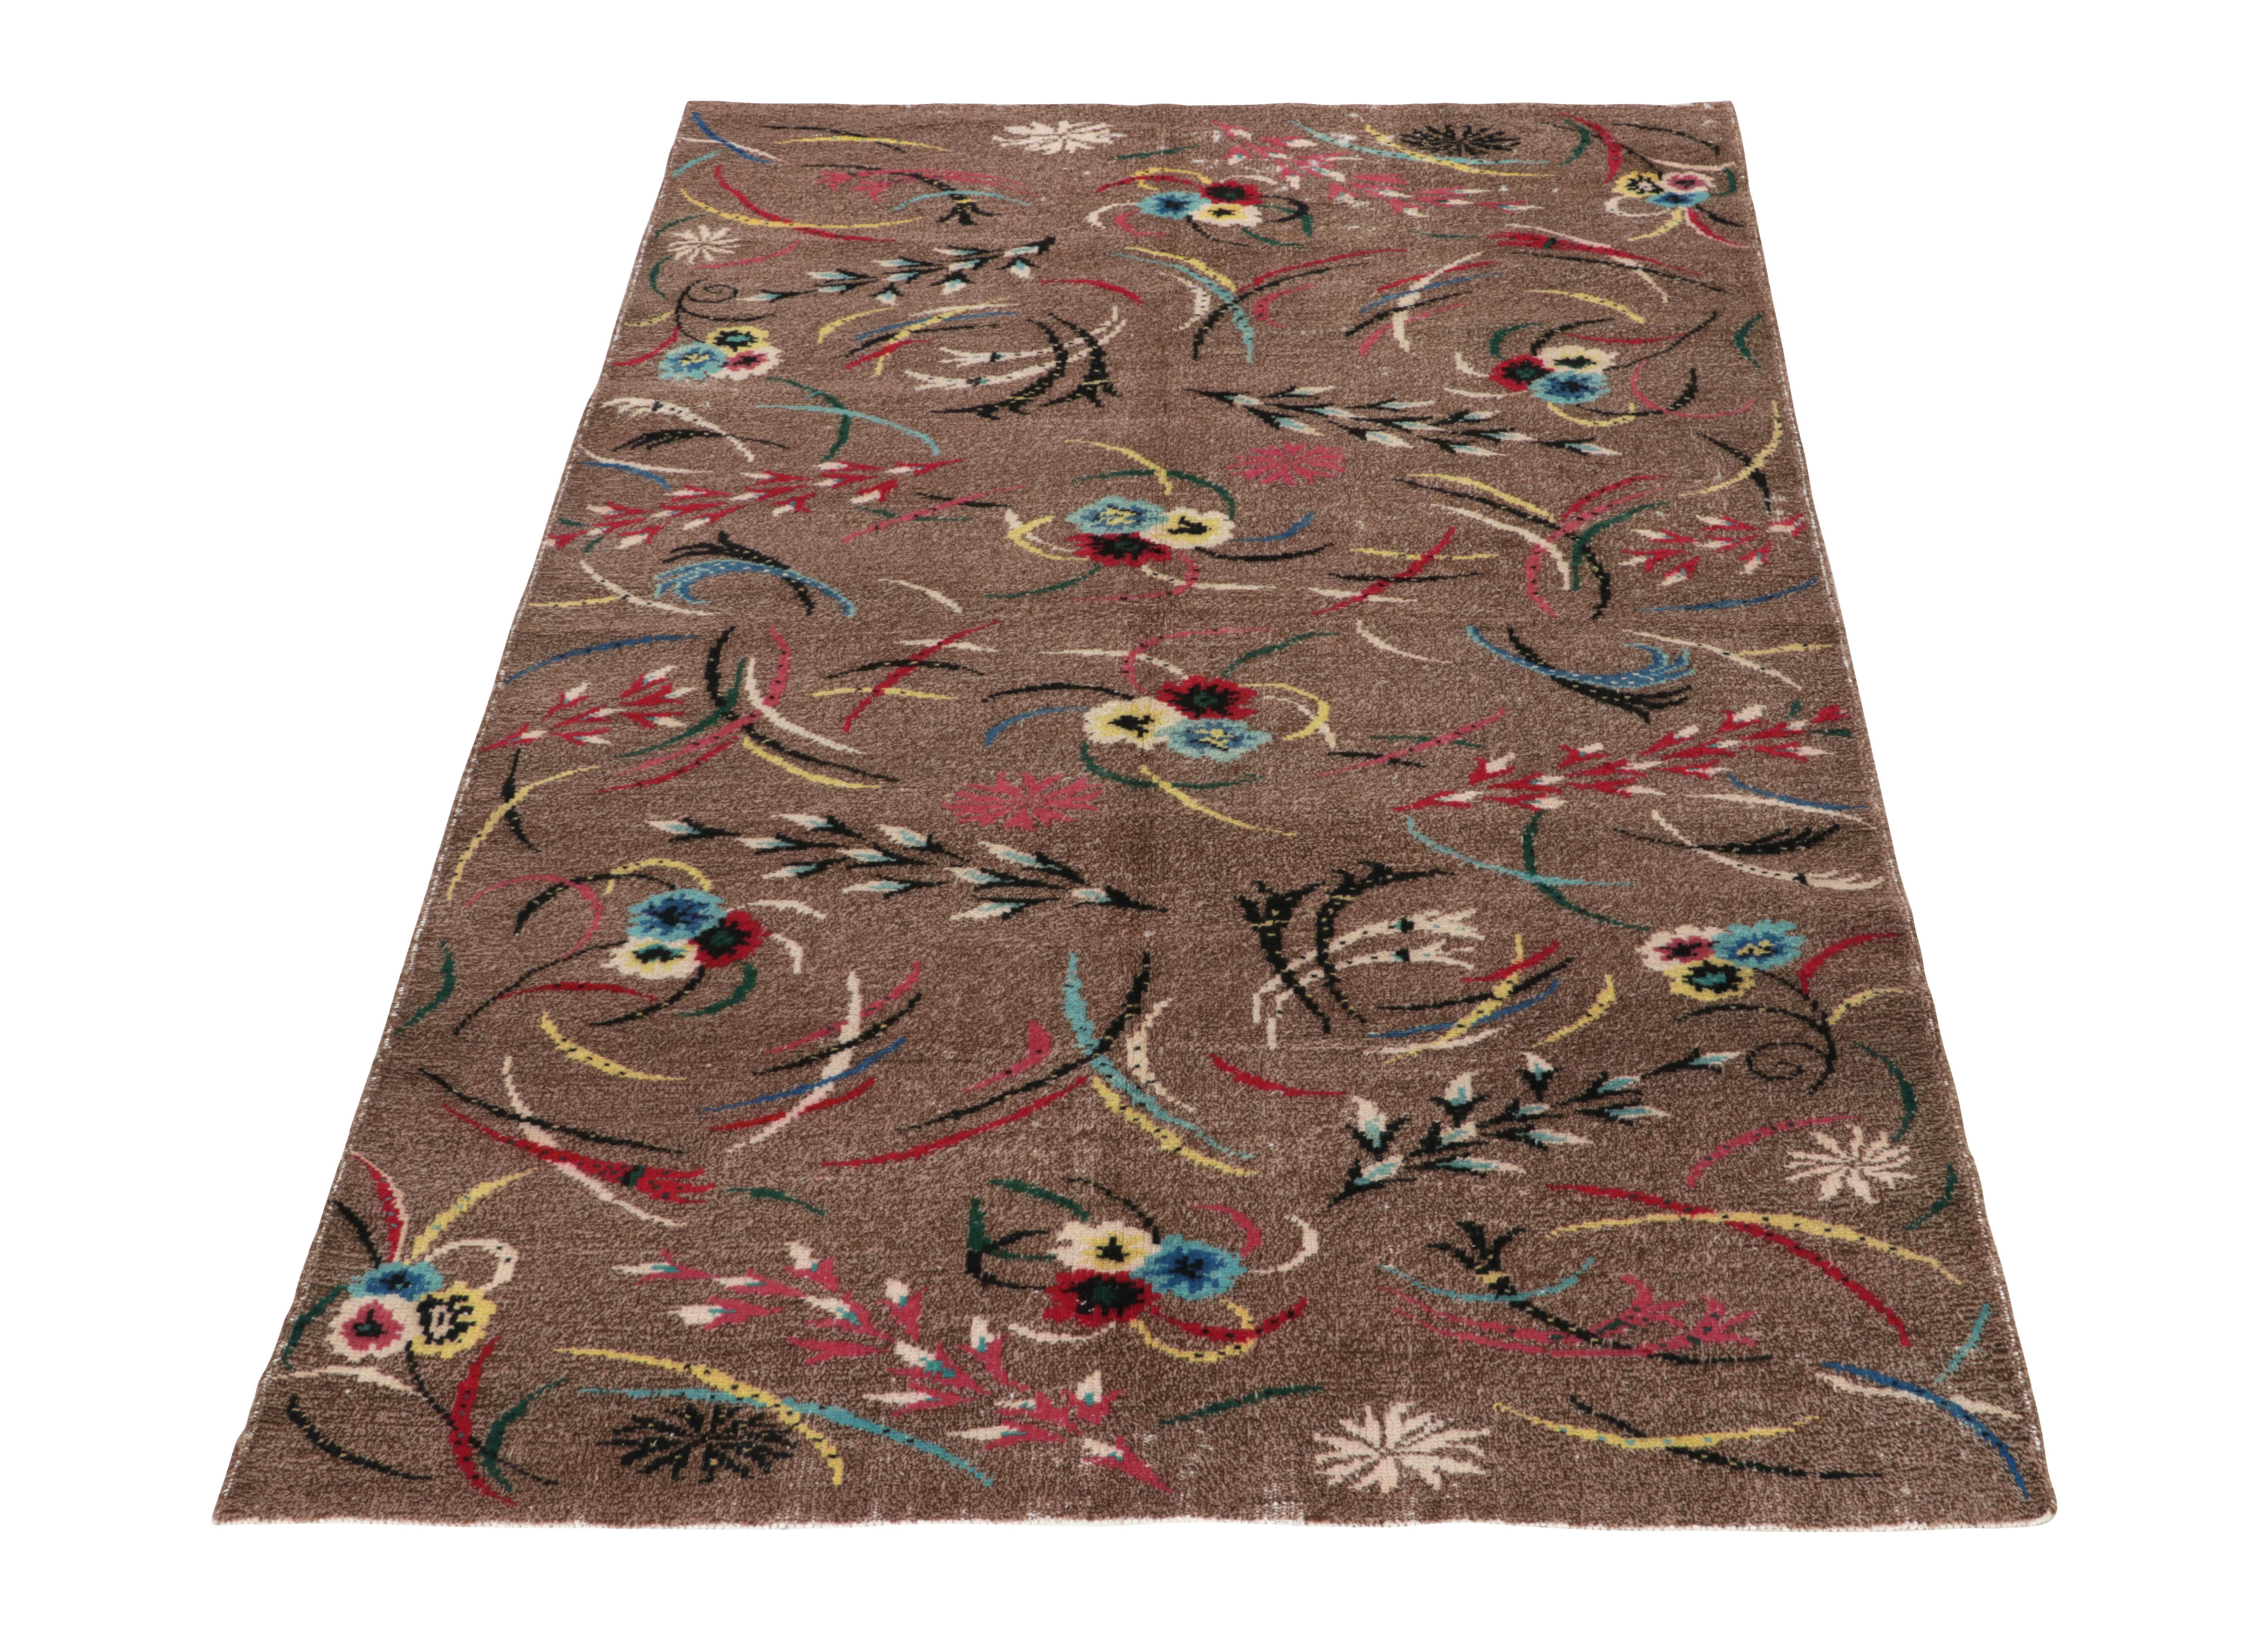 Originating from Turkey circa 1960-1970s, a 6x9 vintage distressed style piece from an acclaimed Turkish designer, now joining Rug & Kilim’s Mid century Pasha collection. Amongst the most unique works of this artist exemplifying their joyful Art